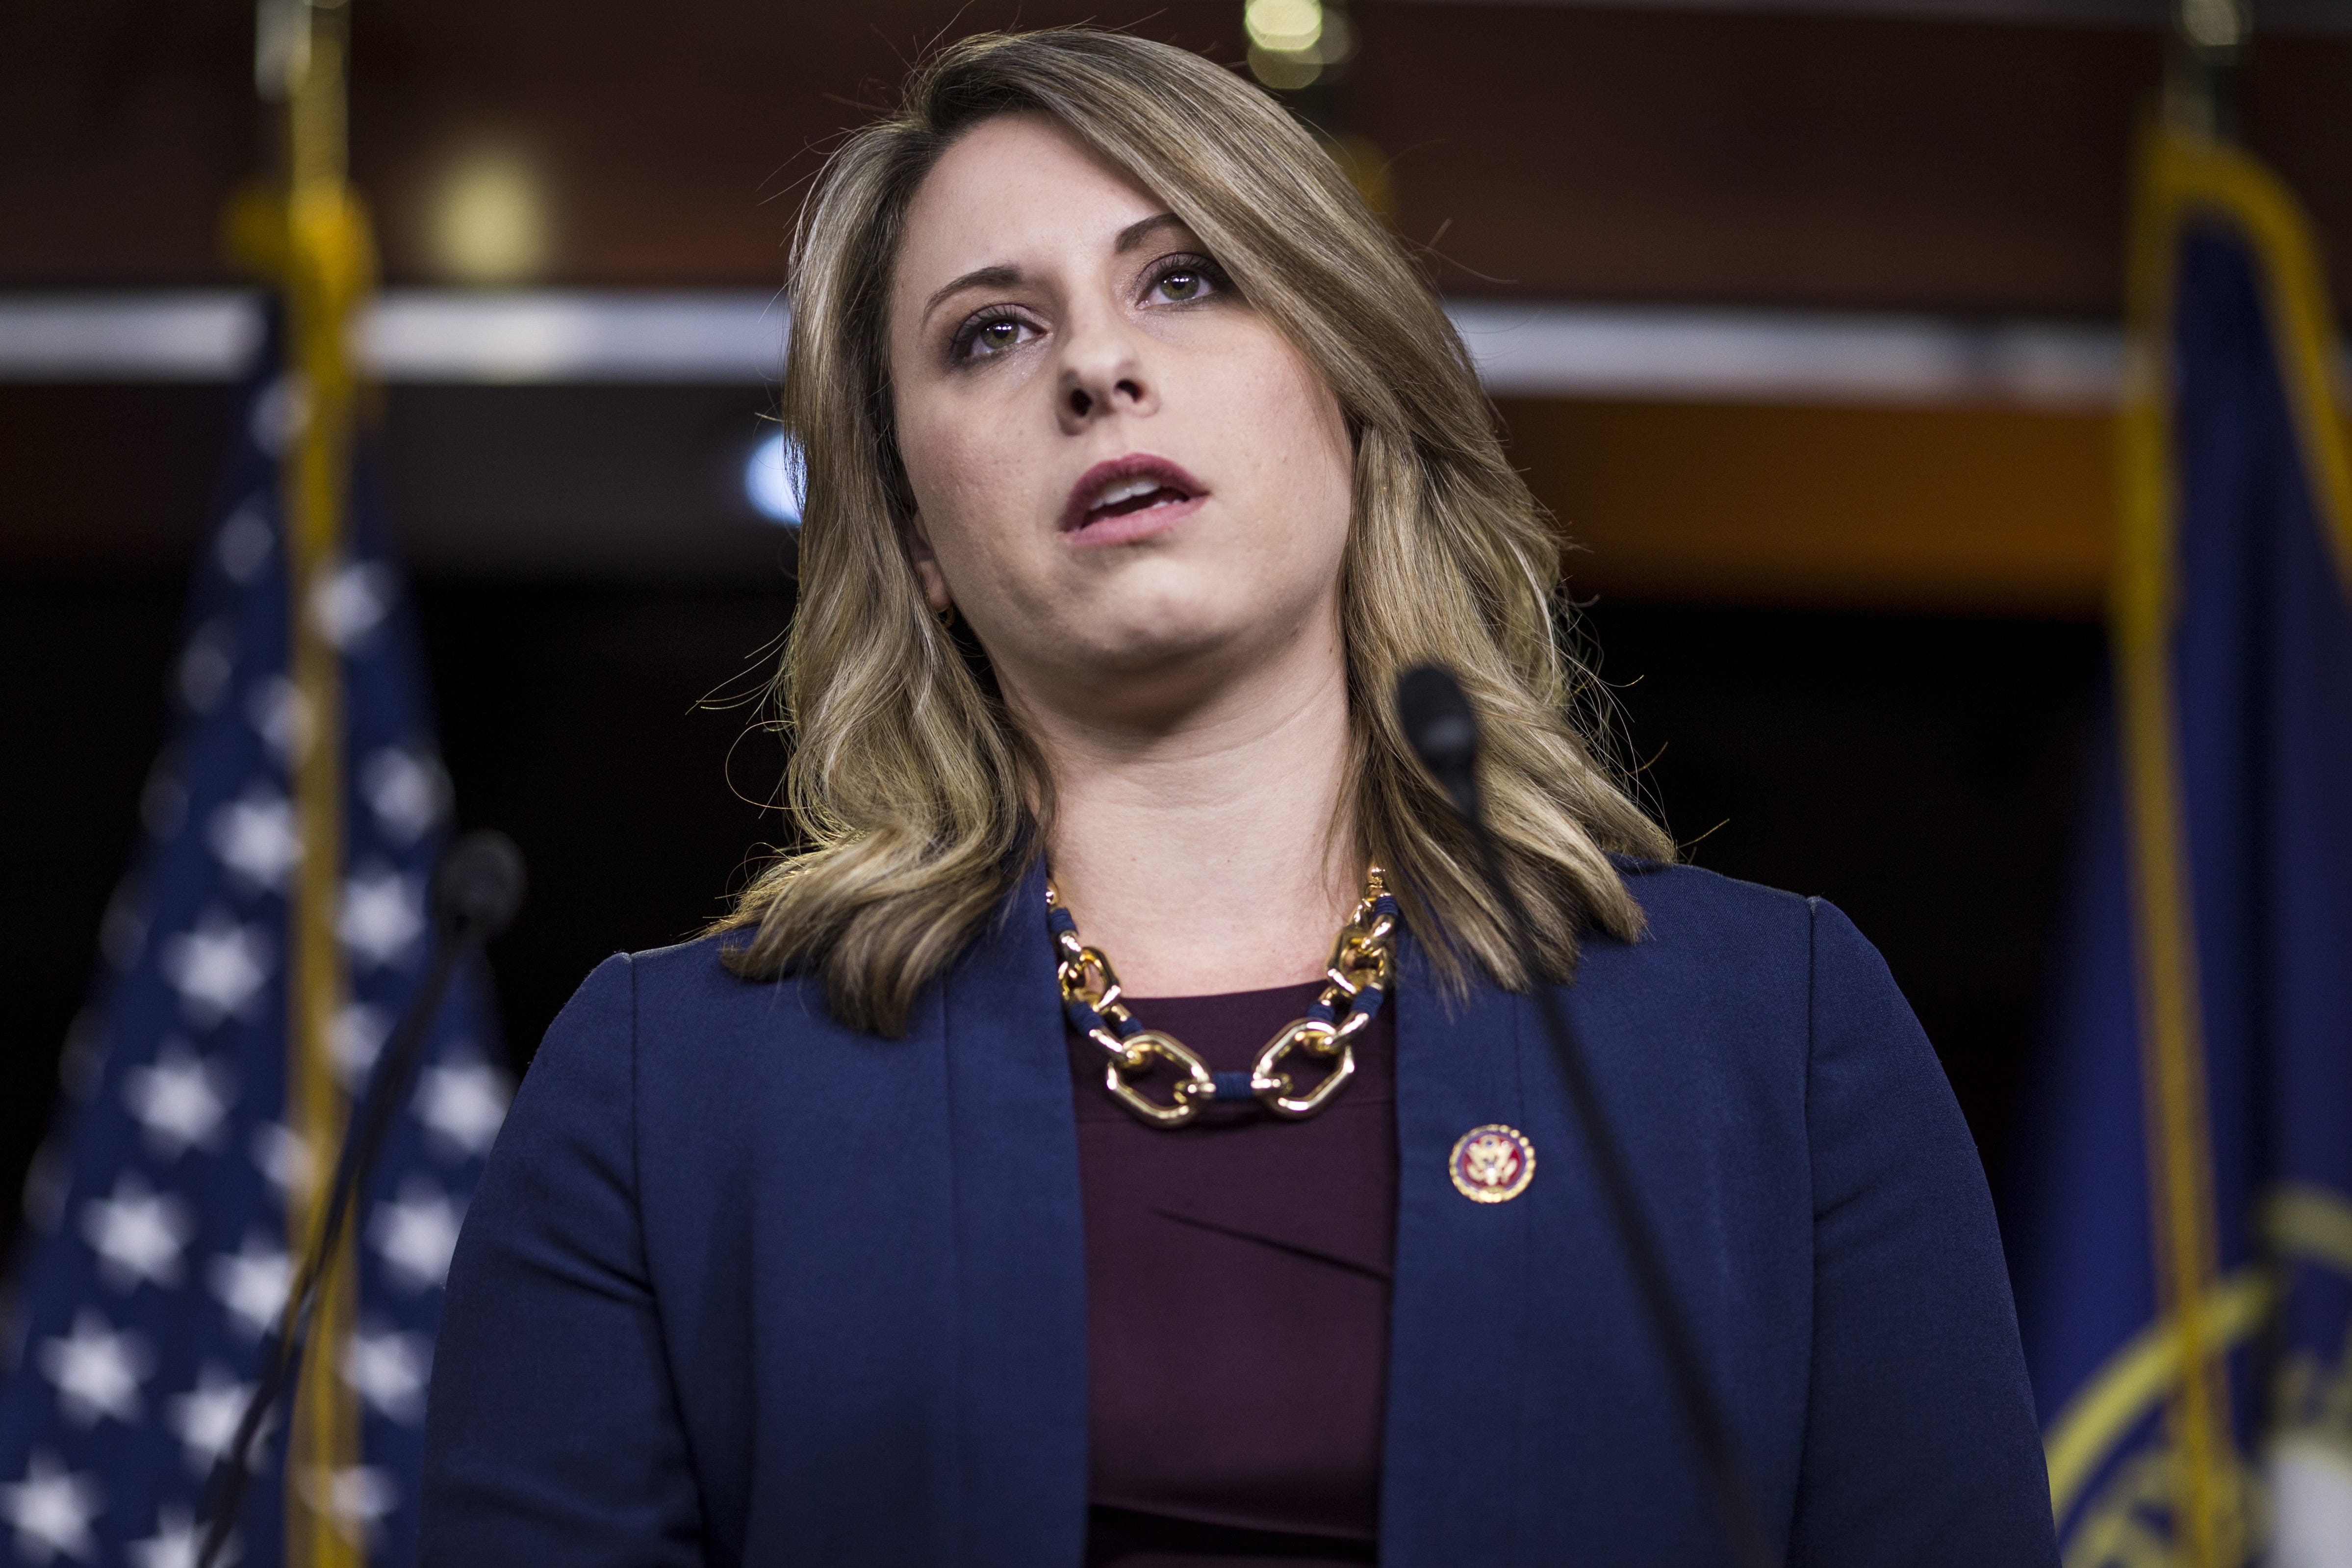 Katie Hill resigns after nude photos. That reveals double ...